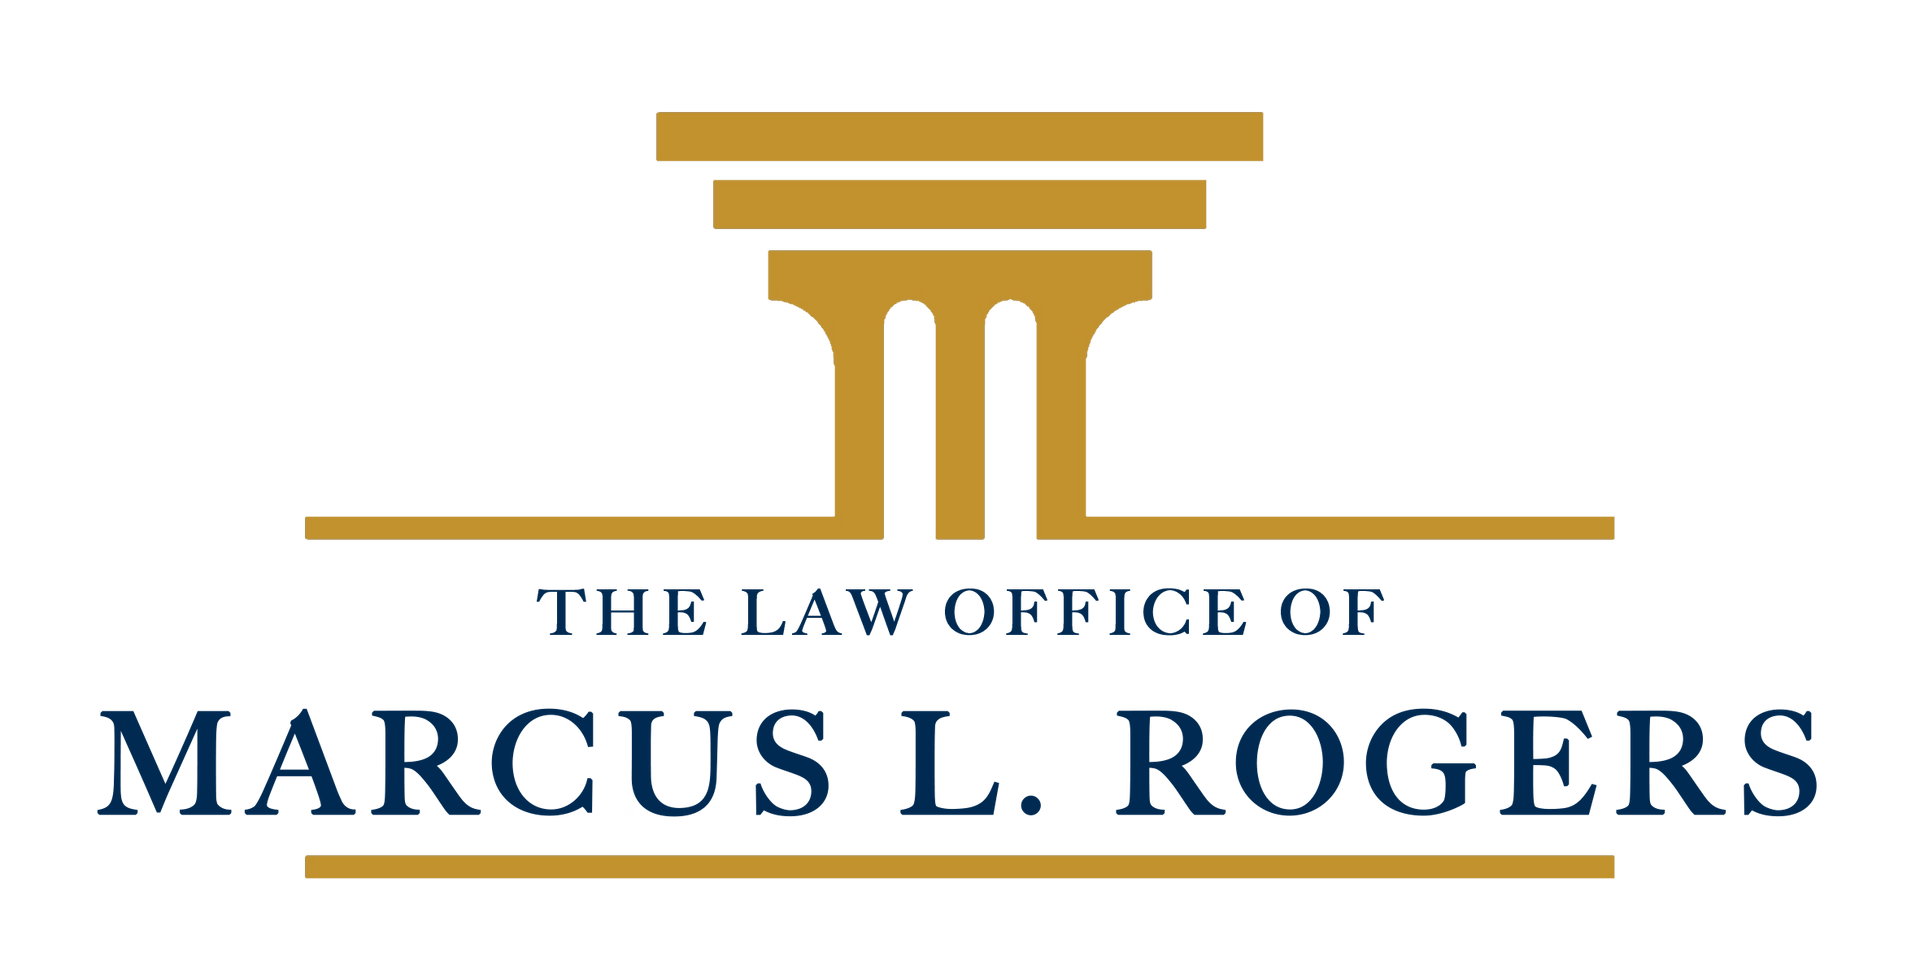 A logo for the law office of Marcus L. Rogers.